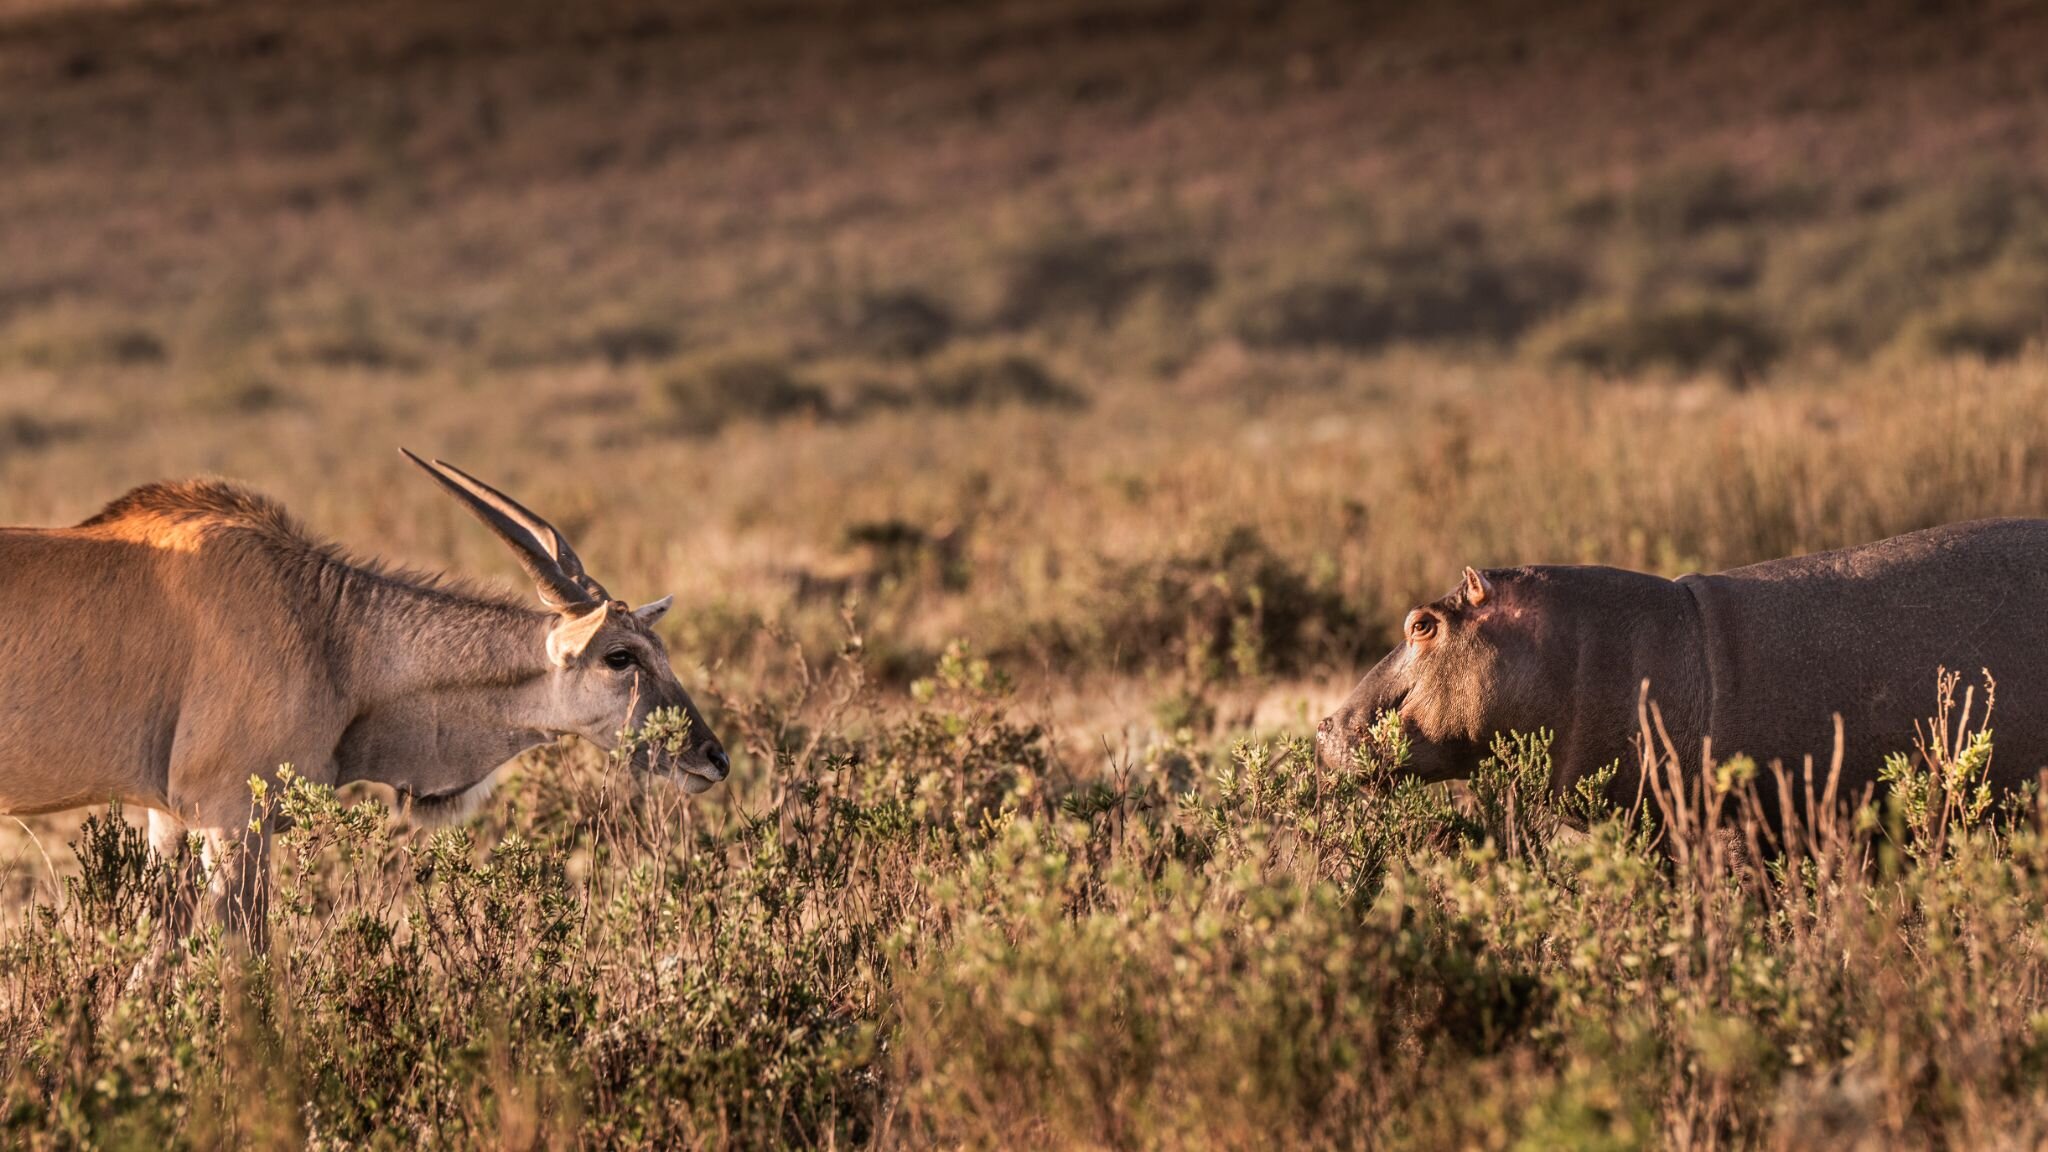 Mutual Respect

Fortunately Eland and Hippos are both vegetarians, so there is little to no chance of conflict between the two species. When they come into contact in the wild, there exists a natural mutual respect between these two large animals.

?